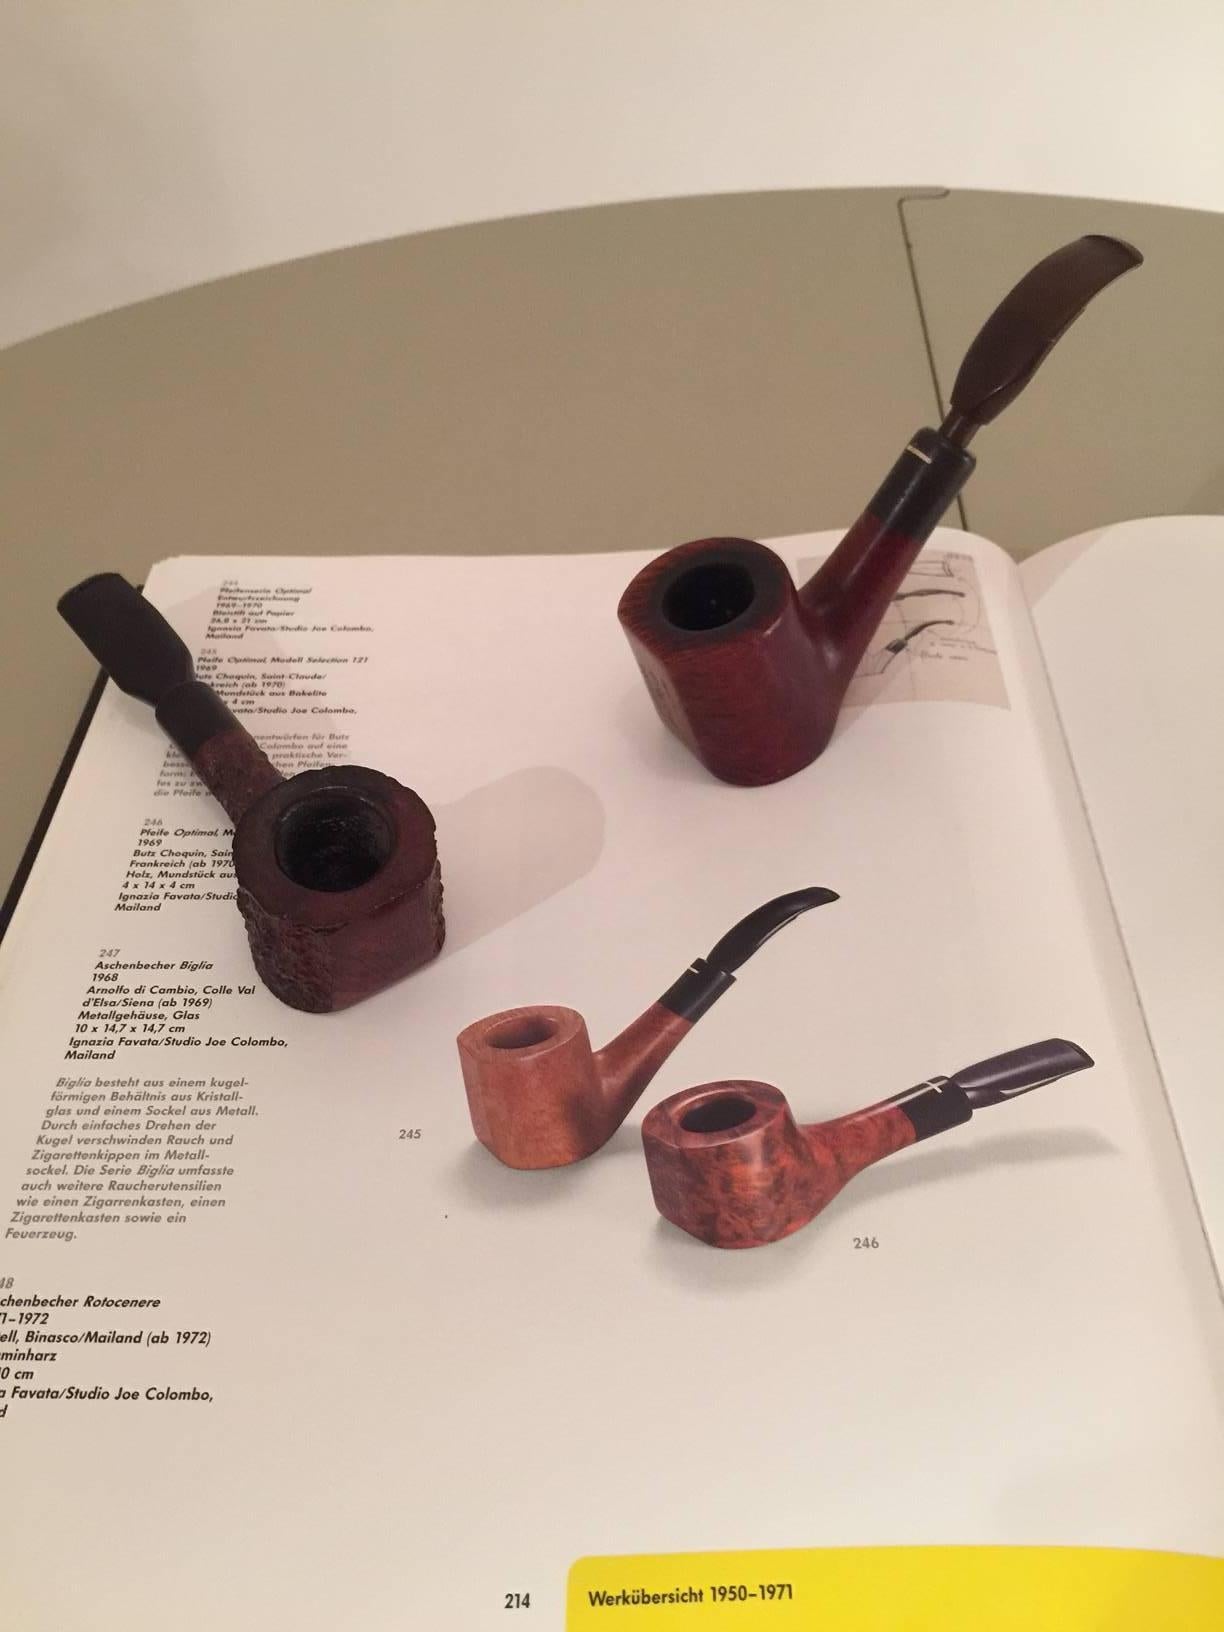 The rarest item designed by Joe Colombo in 1969. Couple of Pipes optimal model special 121 and 122 for Butz Choquin. Part of the permanent collection of Vitra Design Museum.
 